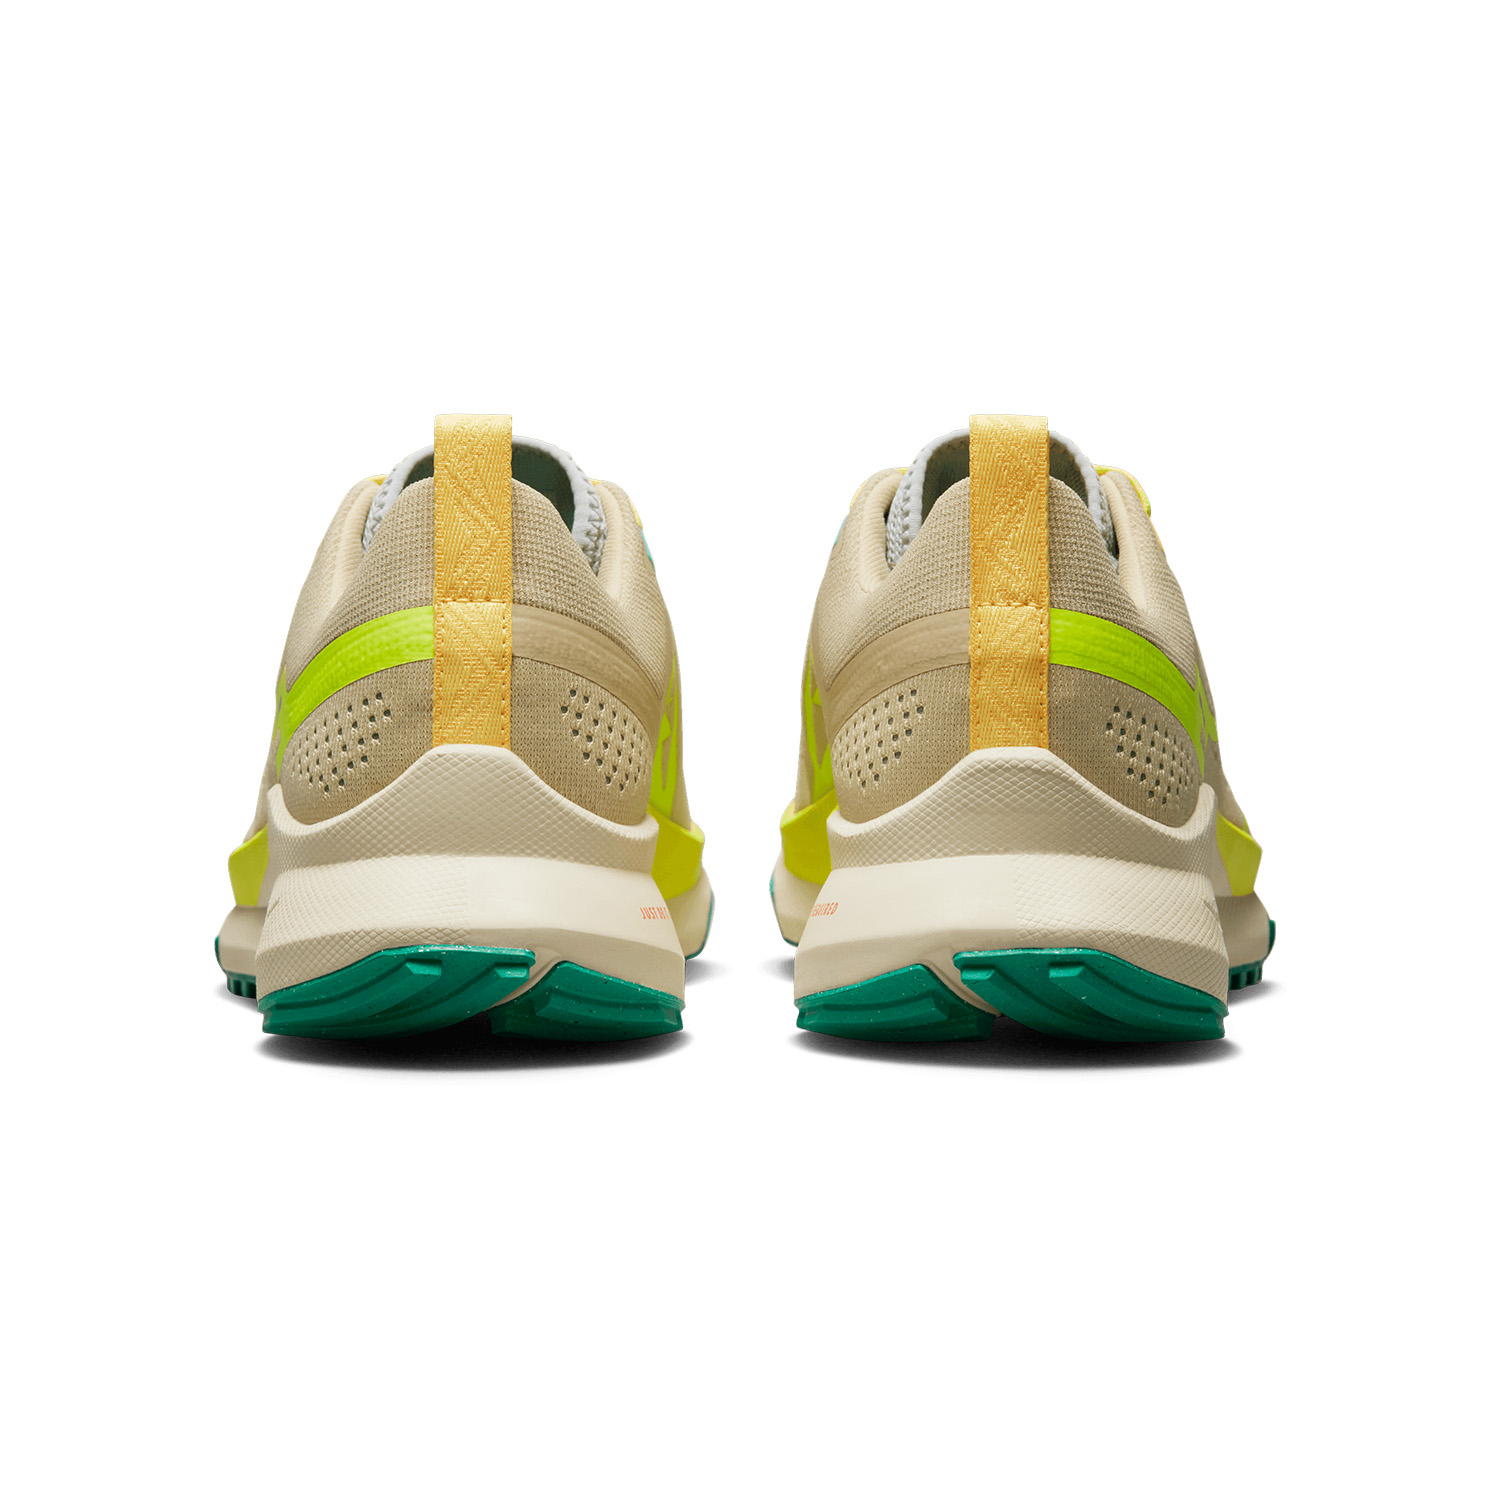 Nike React 4 Trail Hombre Gold